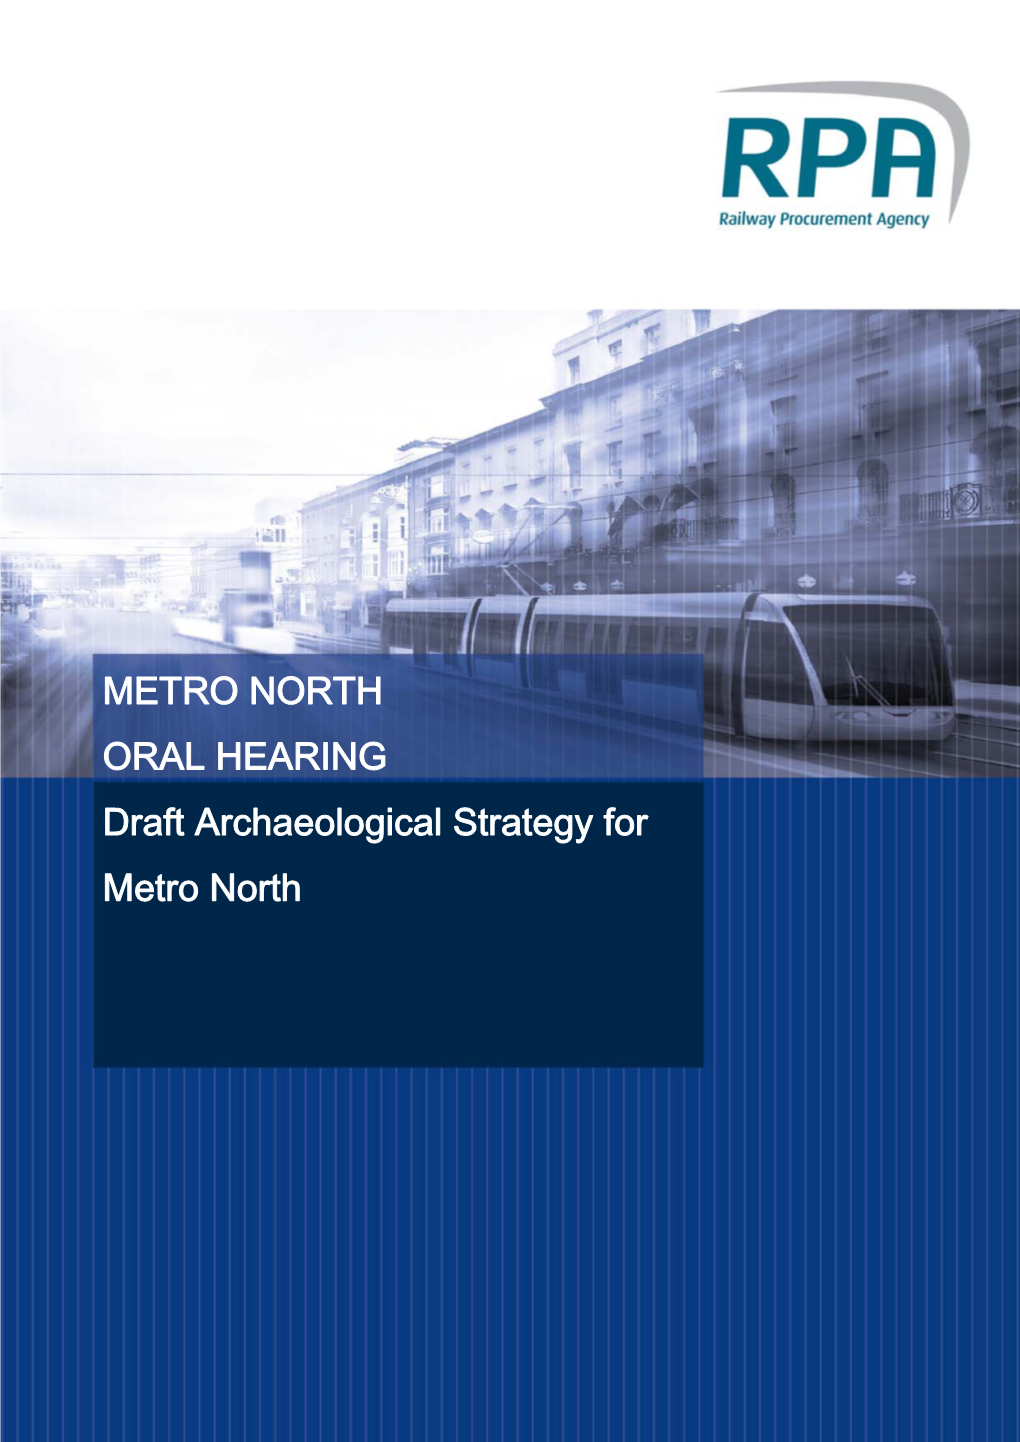 METRO NORTH ORAL HEARING Draft Archaeological Strategy for Metro North